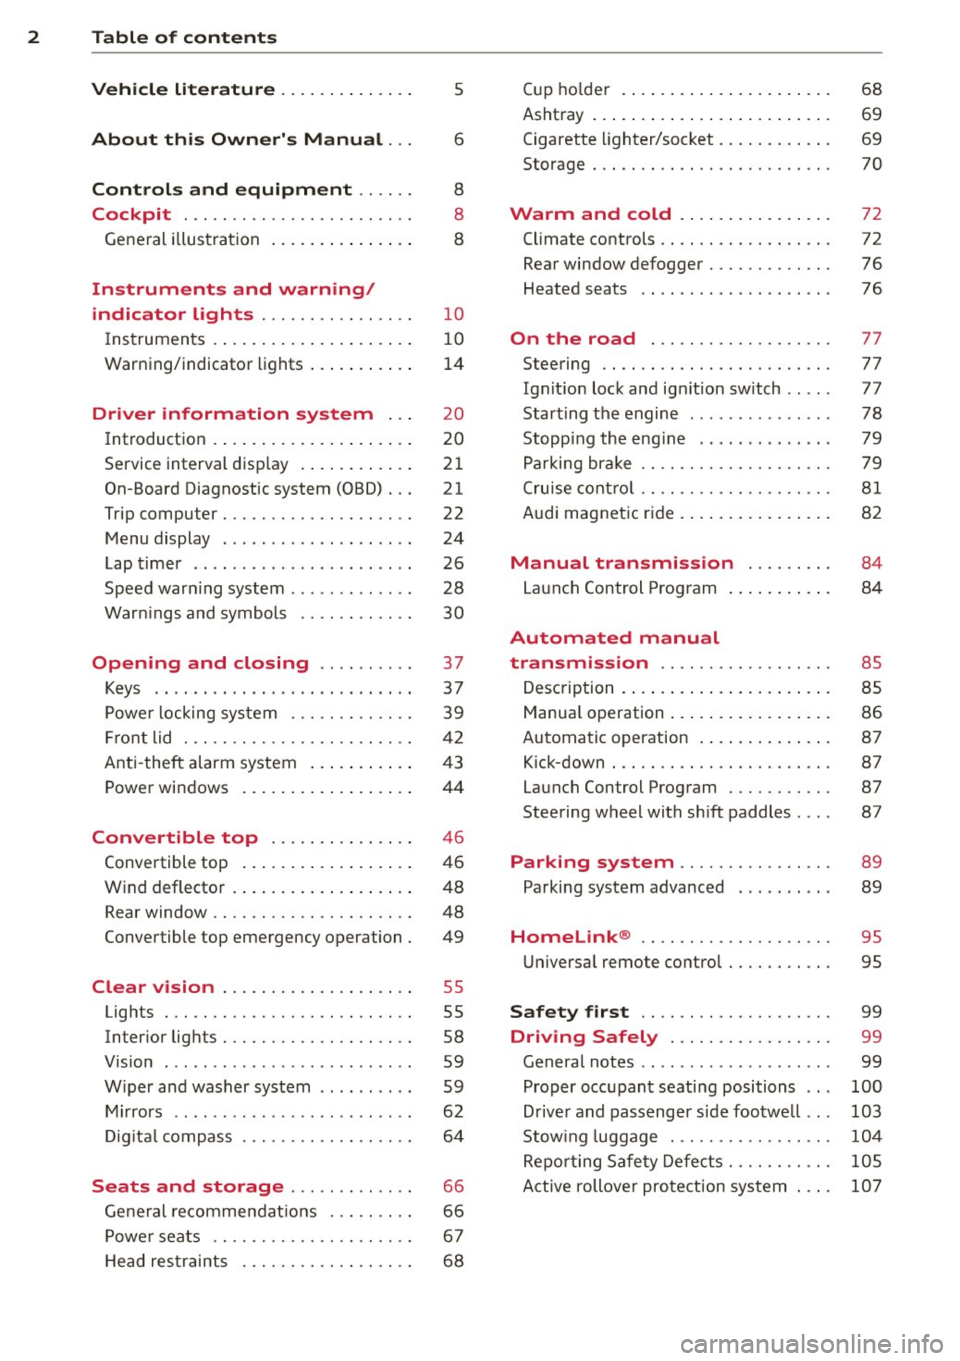 AUDI R8 SPYDER 2011  Owners Manual 2  Table  of  contents Vehicle  literature  ............. . 
About  this  Owners  Manual  ... 
Controls  and  equipment  .. ...  . 
Cockpit  ................... ... . . 
General  illustrat ion  .....